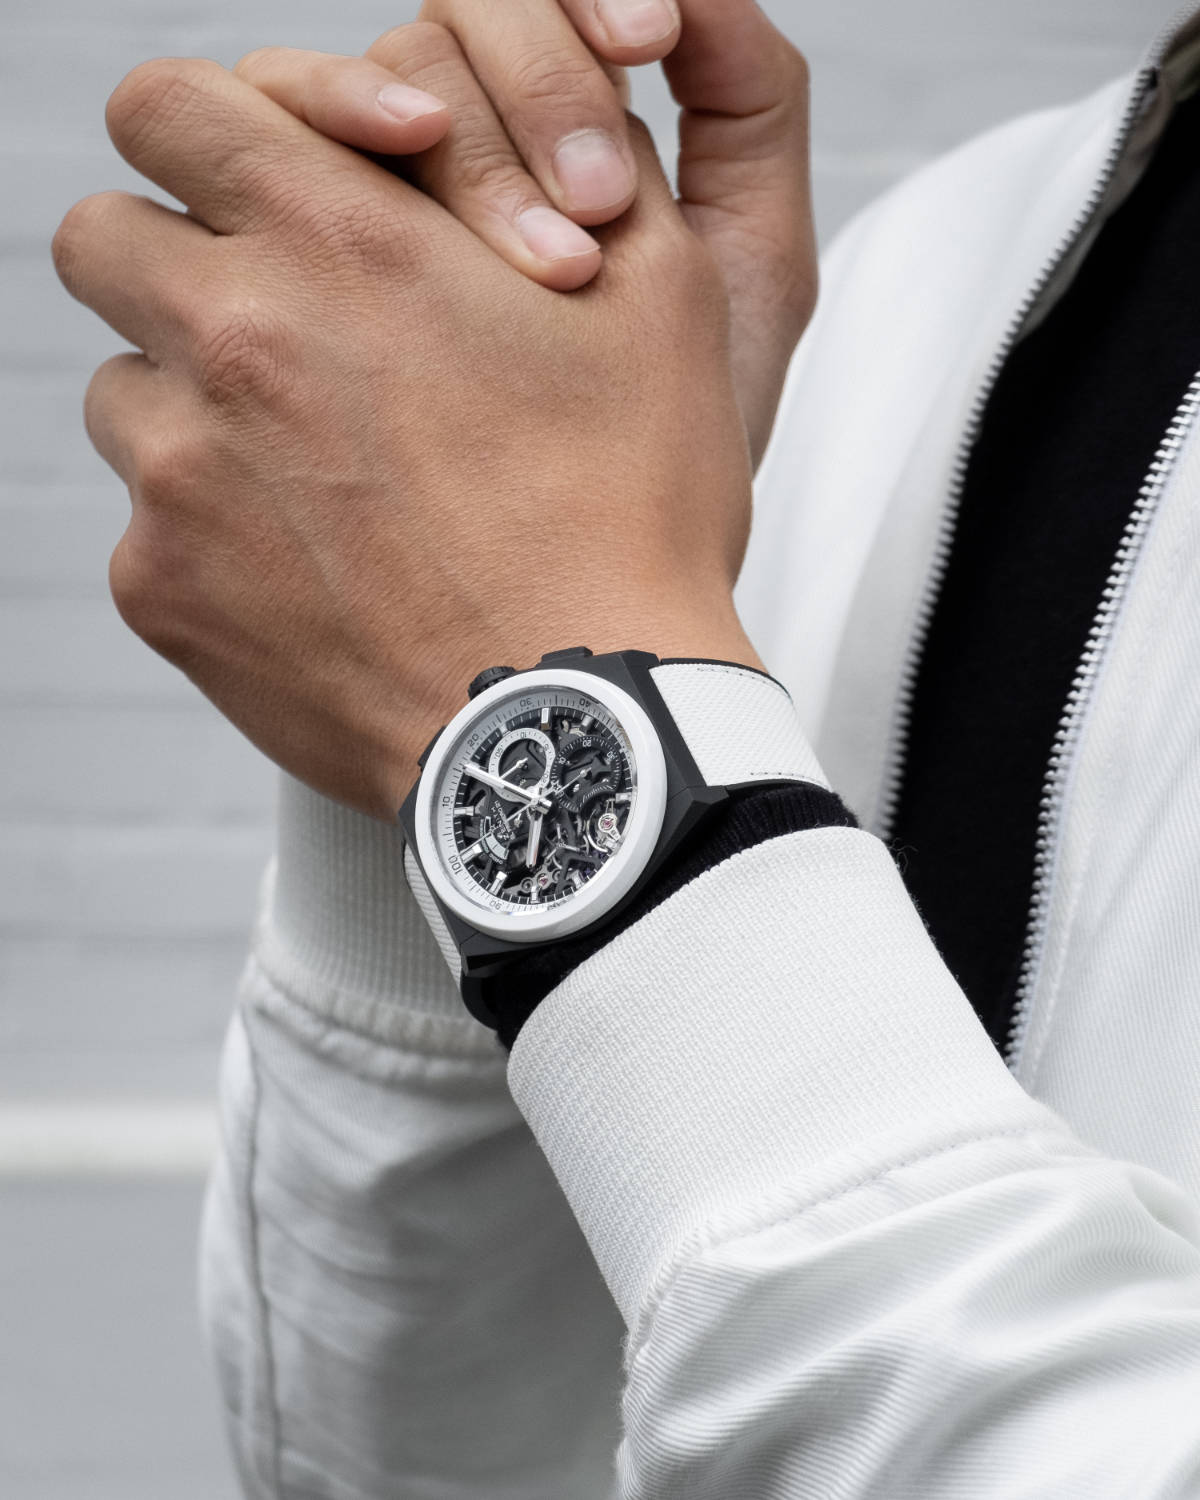 Zenith goes for strikingly bold contrast with the DEFY 21 and DEFY Classic Black & White